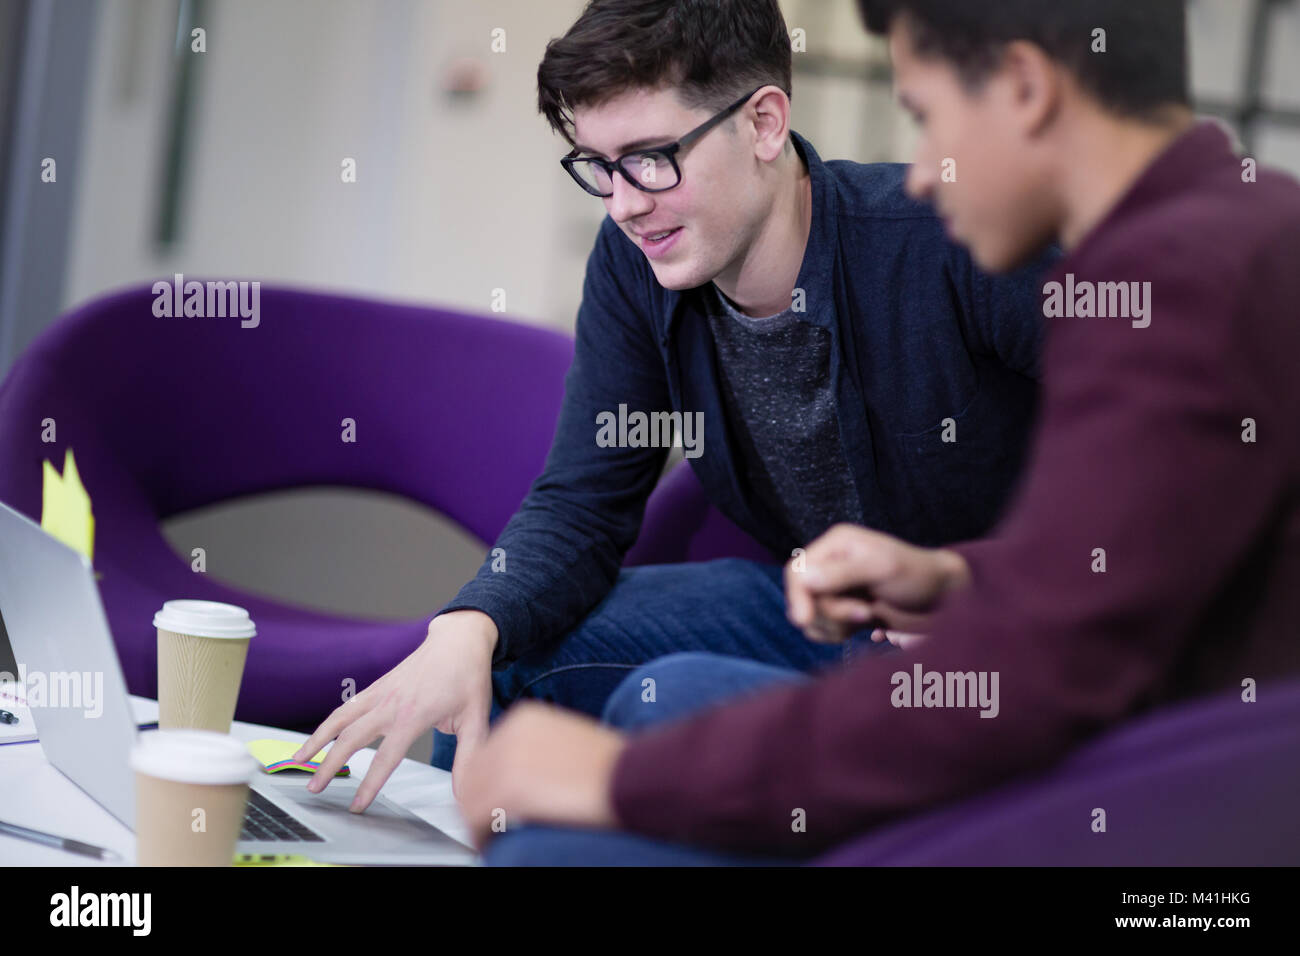 Male students working together Stock Photo